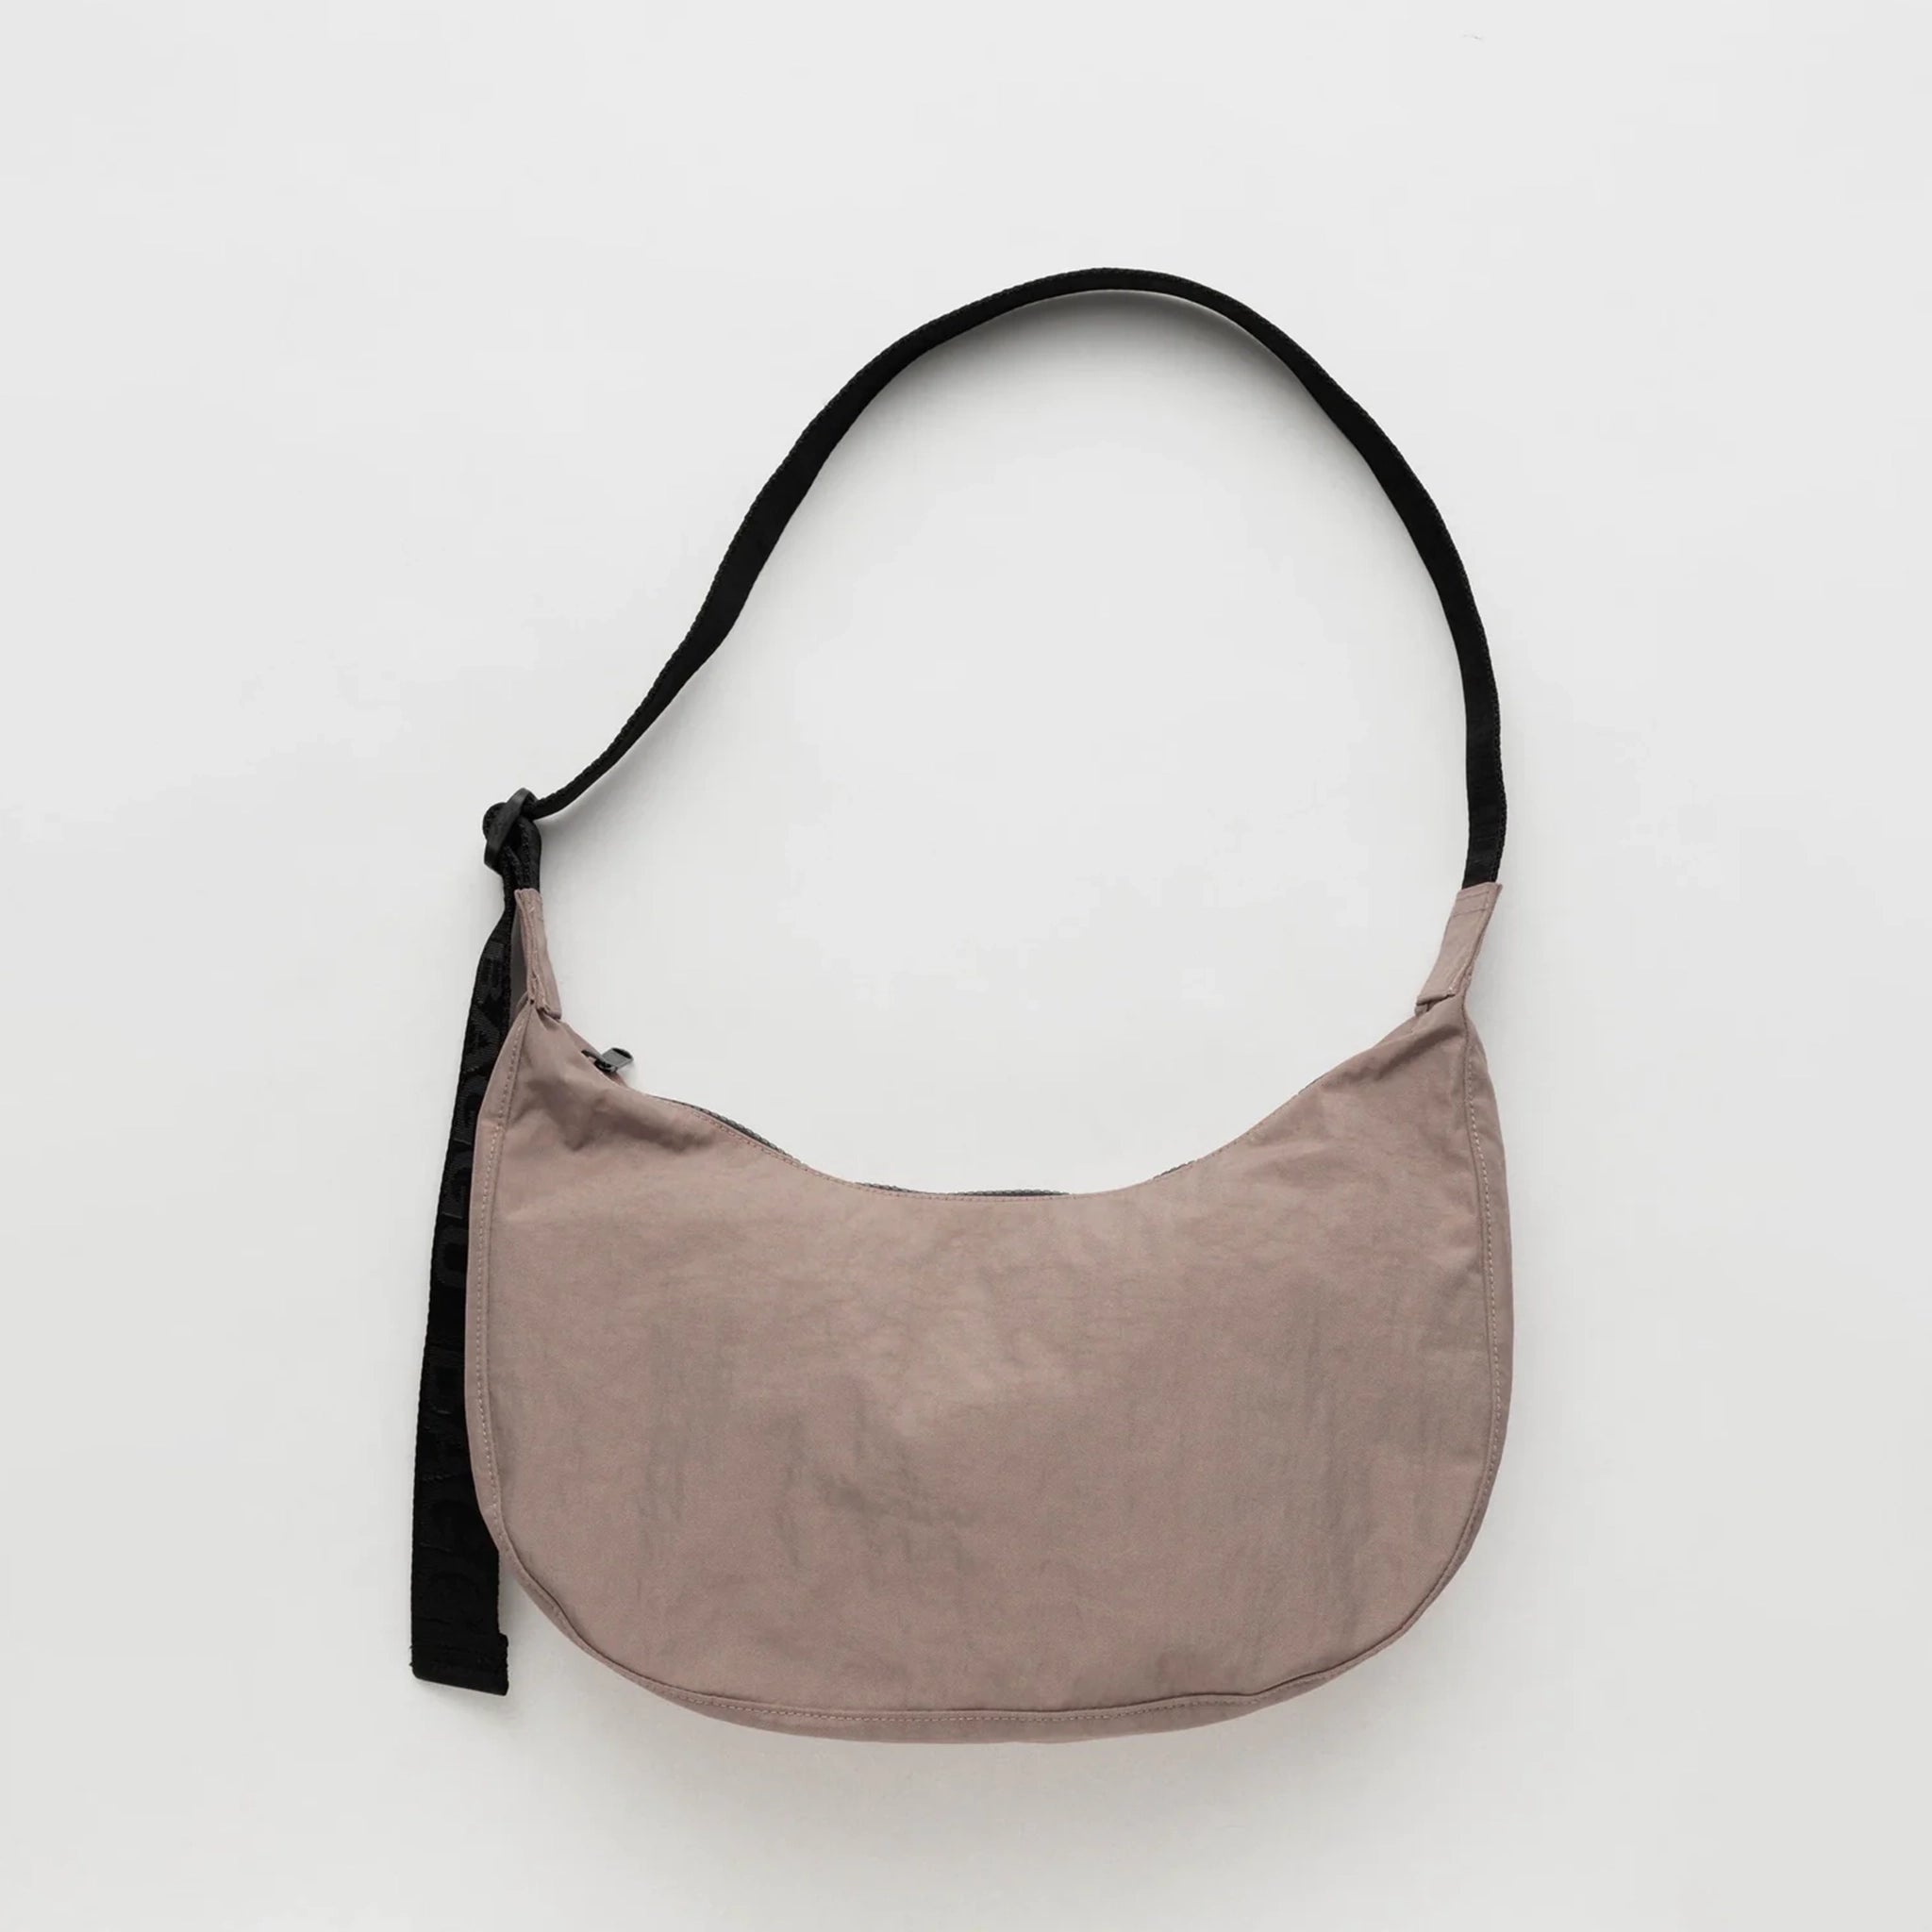 A taupe nylon crescent shaped bag with an adjustable black strap and a single zipper.